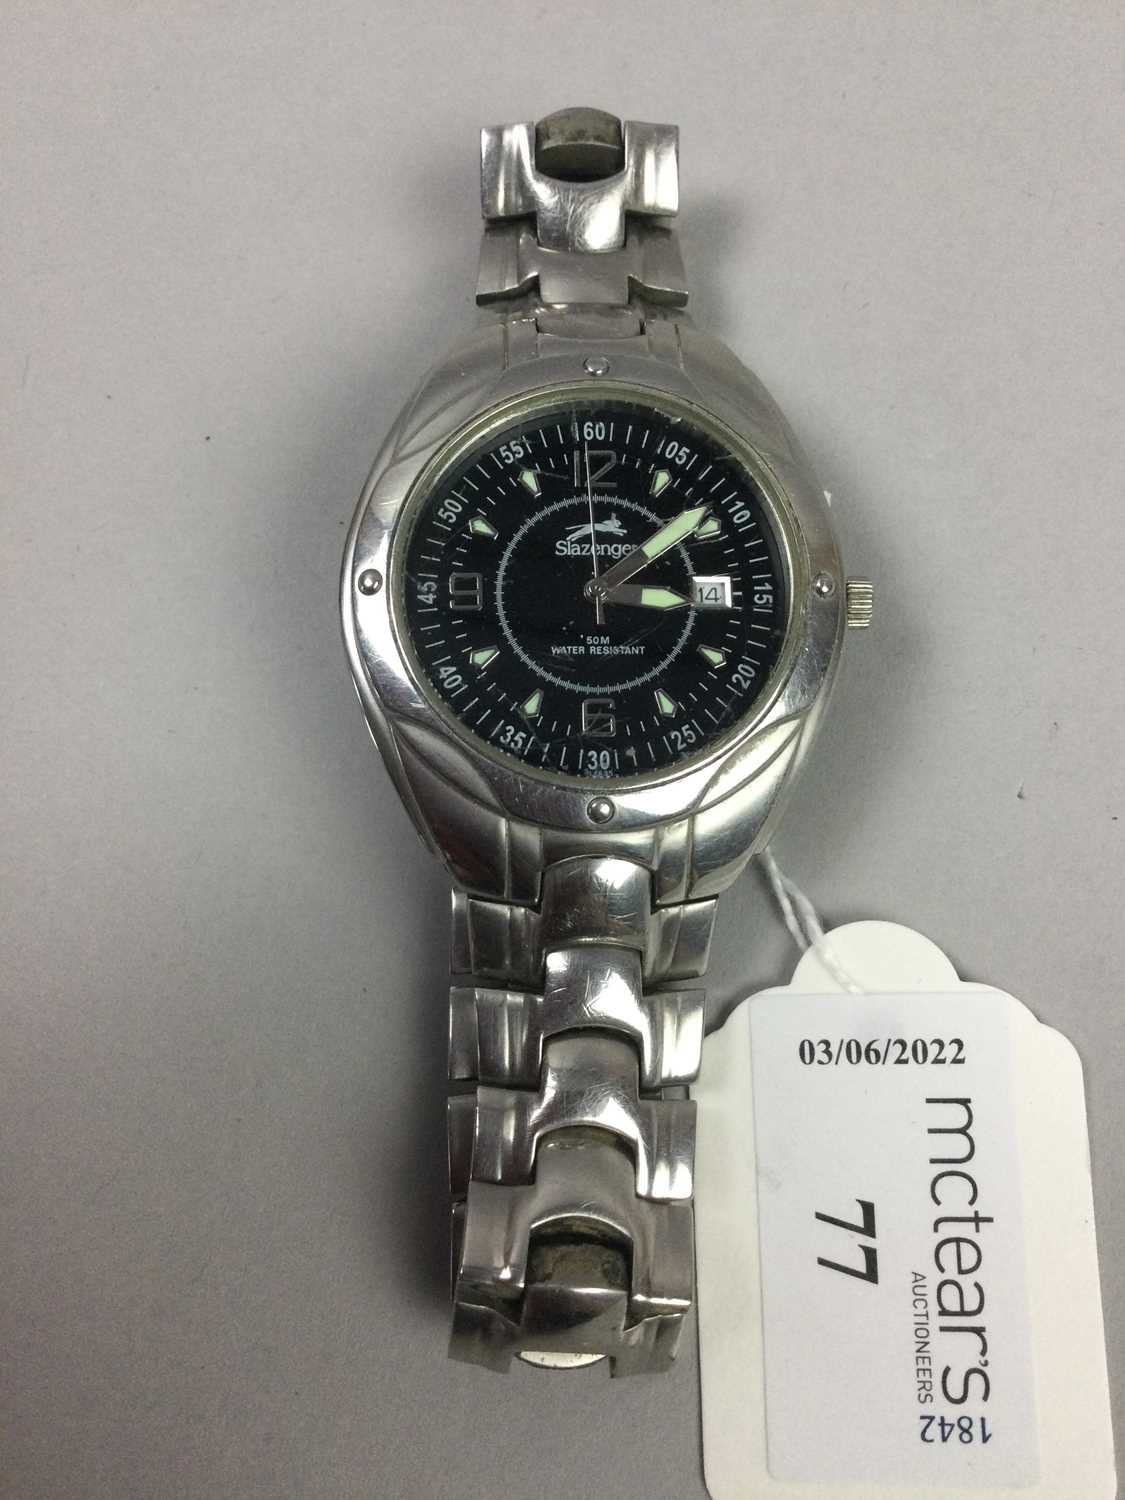 A GENT'S SLAZENGER STAINLESS STEEL WRIST WATCH - Image 2 of 2